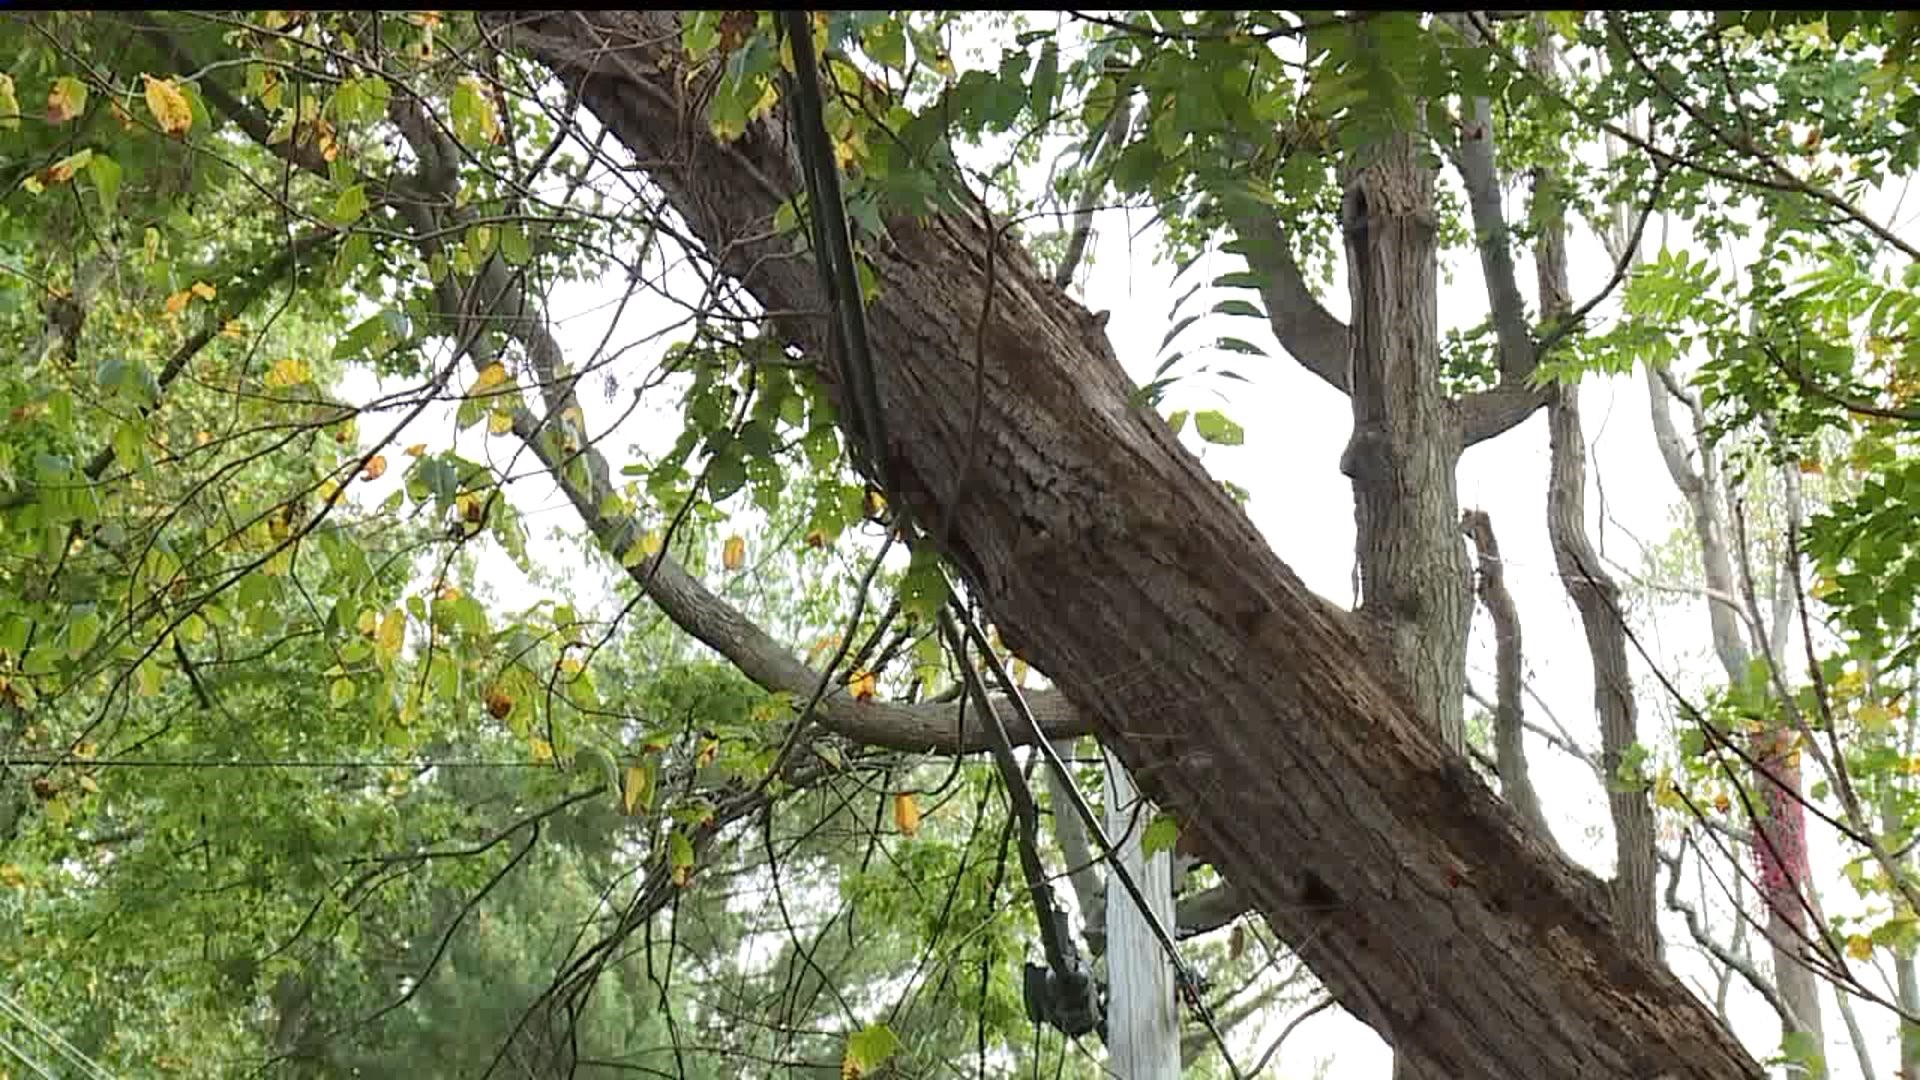 Dead tree hanging on wires hazard for drivers in Lebanon Co.